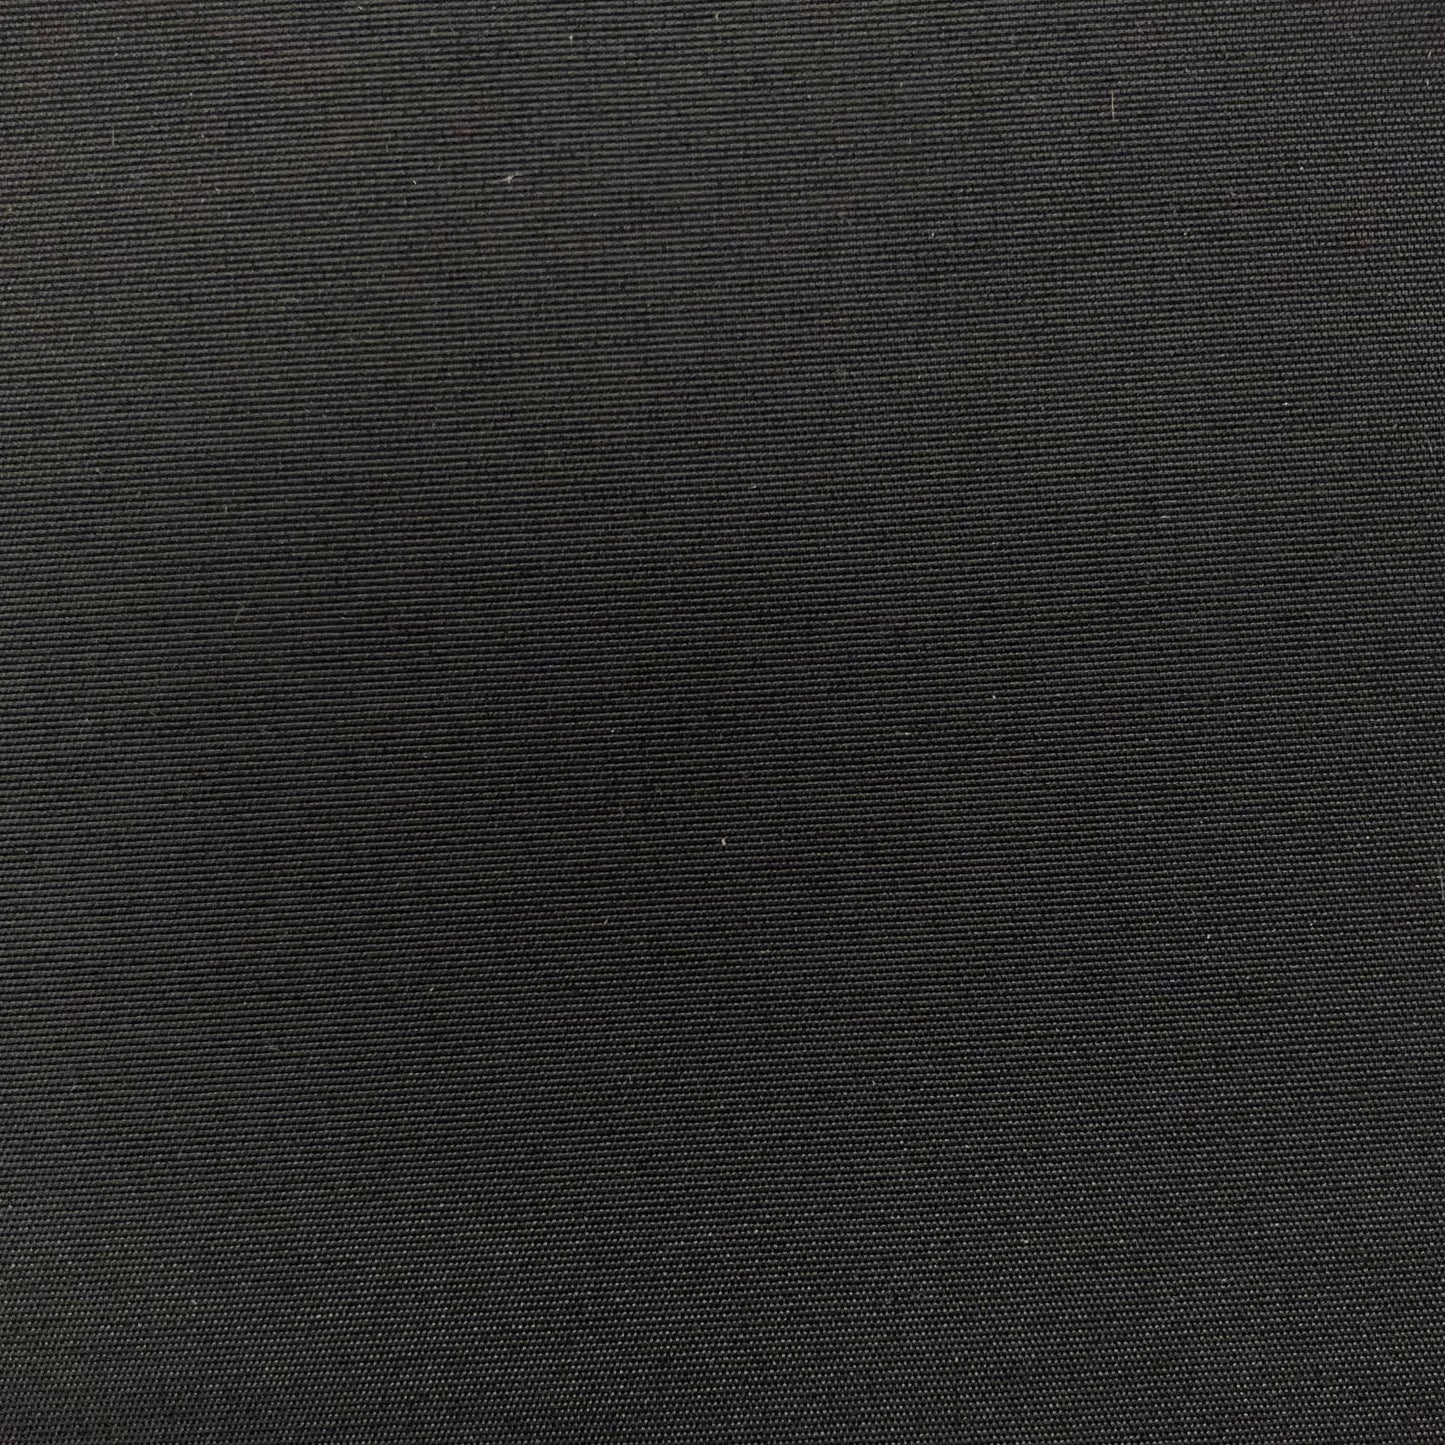 2-Layer Waterproof Breathable Polyester Fabric - Black (Sold per Yard)